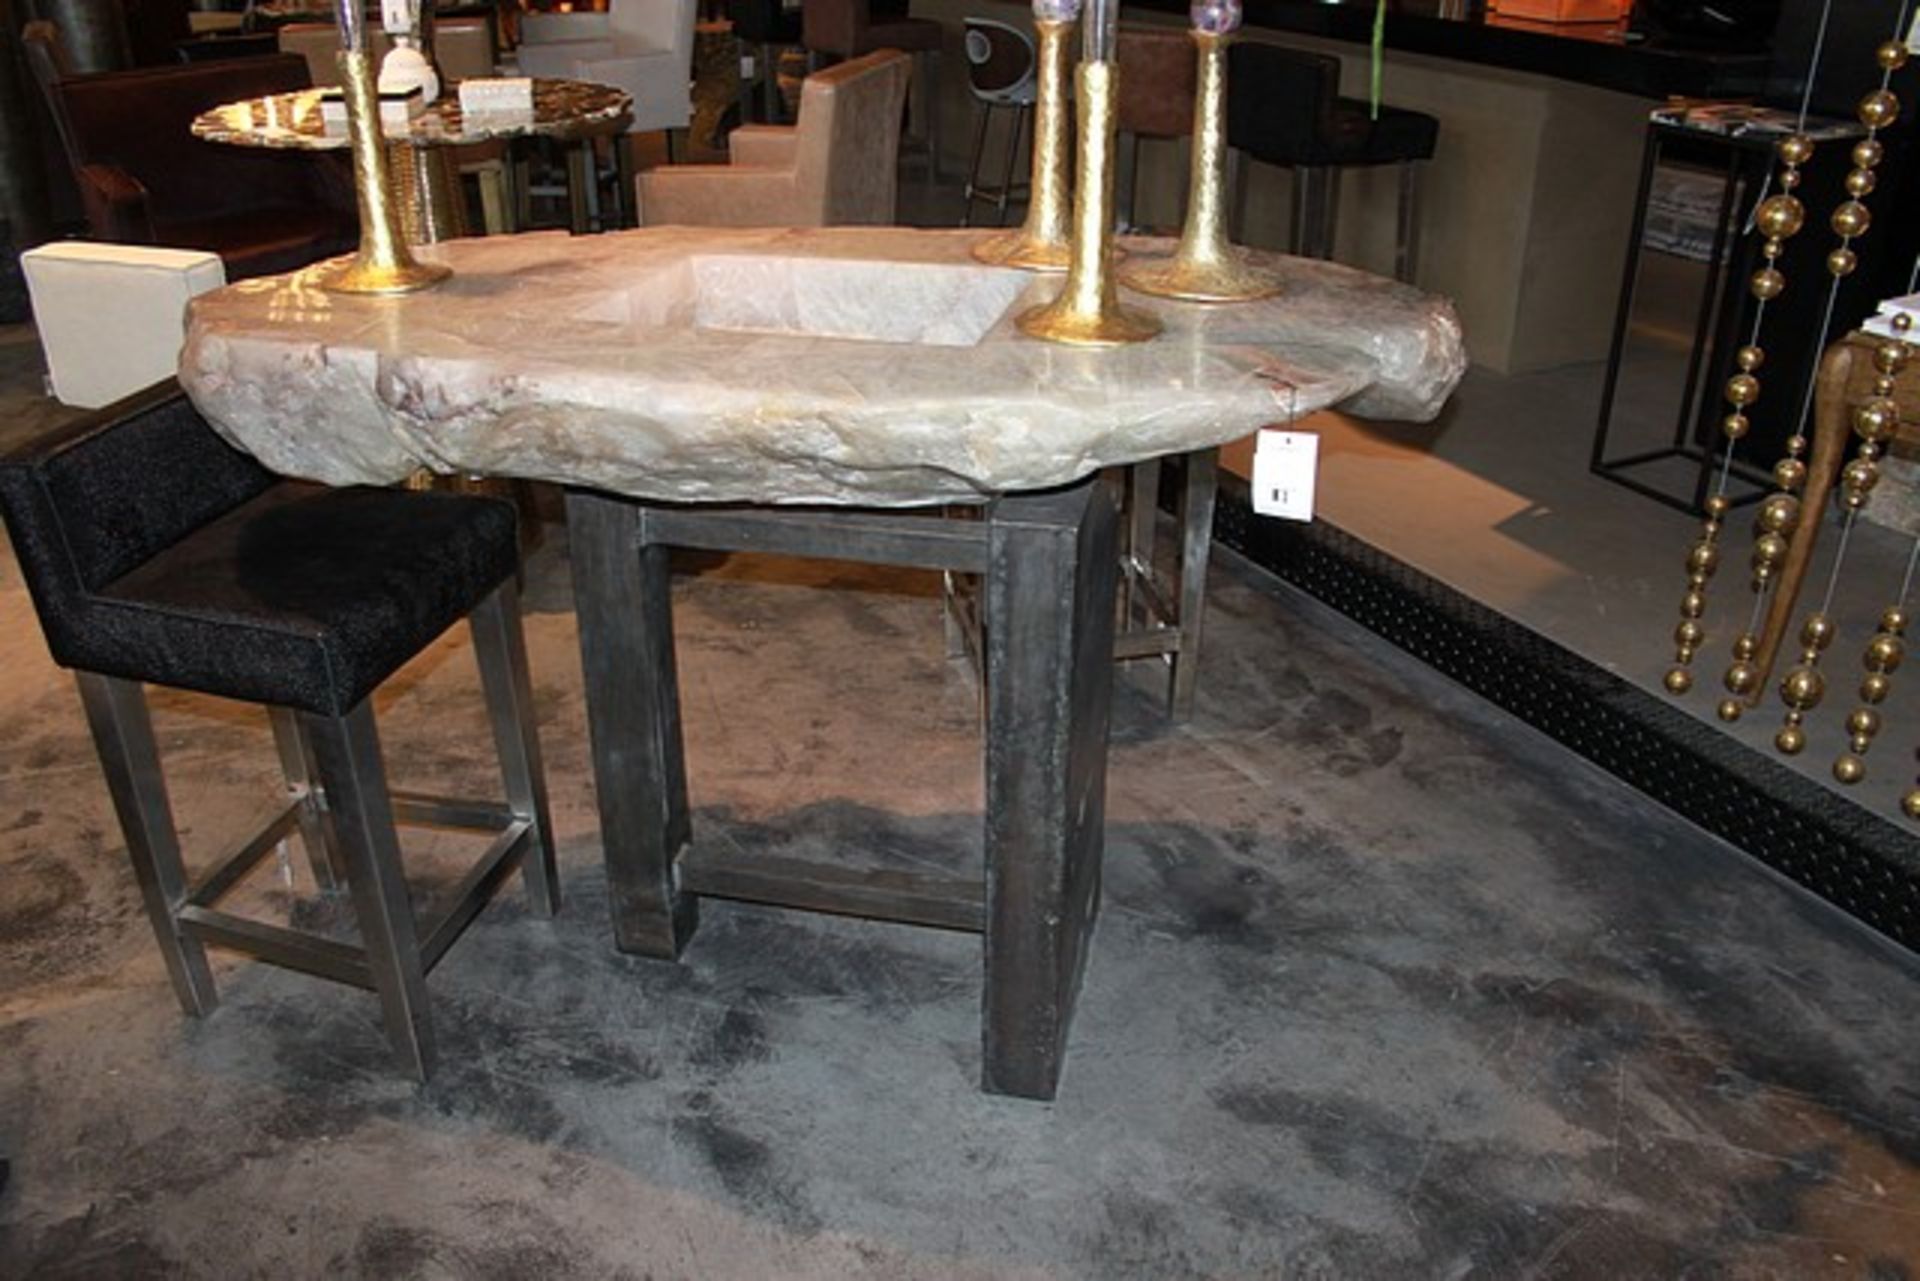 Bar table wine bottlecooler a hand carved clear quartz precious rock piece table top combines luxury - Image 2 of 7